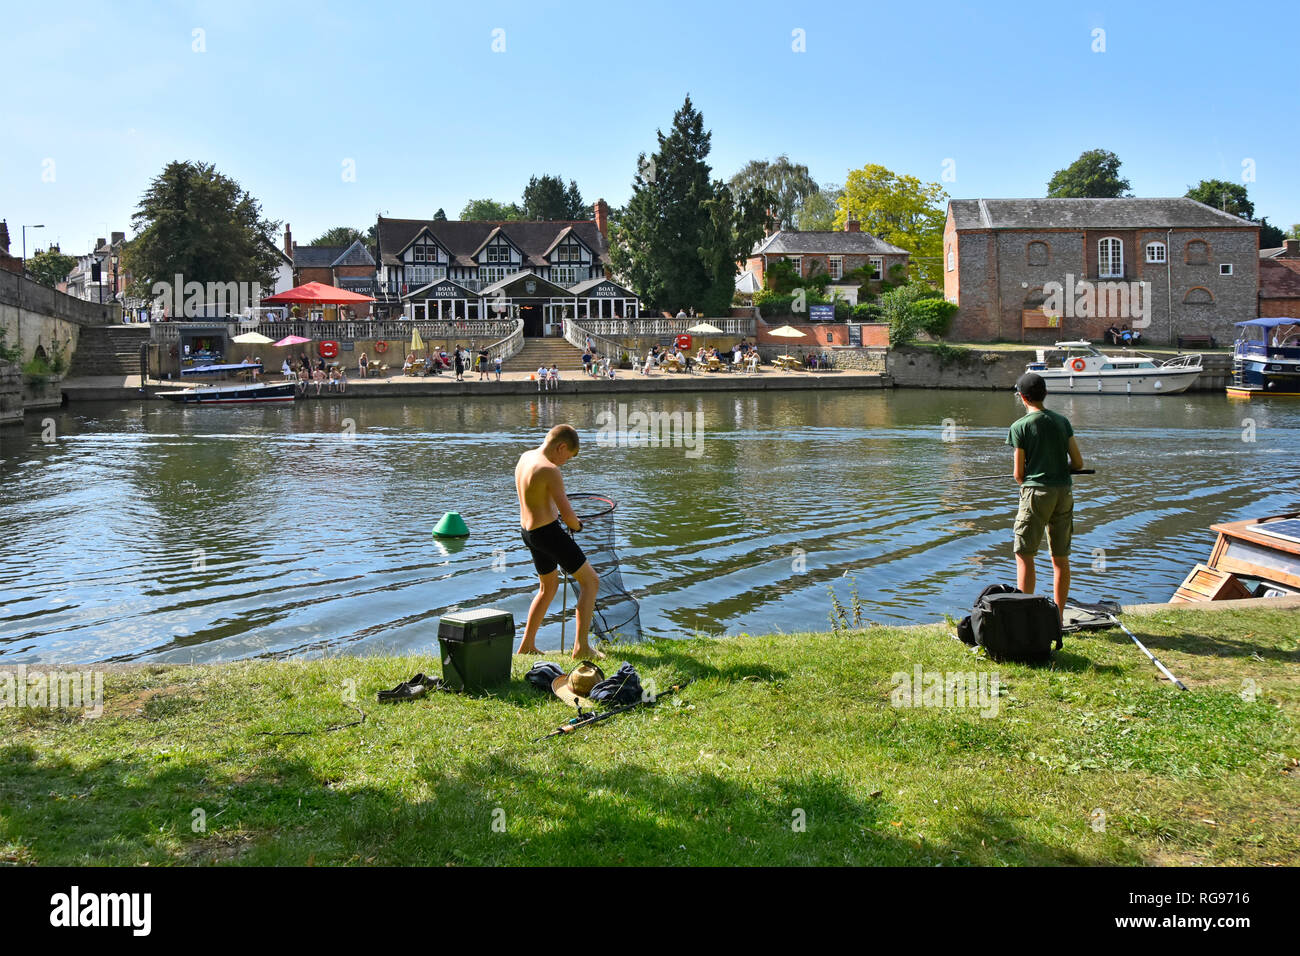 Two young teenagers boy fishing from shore River Thames on hot blue sky summer day with Boat House pub beyond at Wallingford Oxfordshire England UK Stock Photo